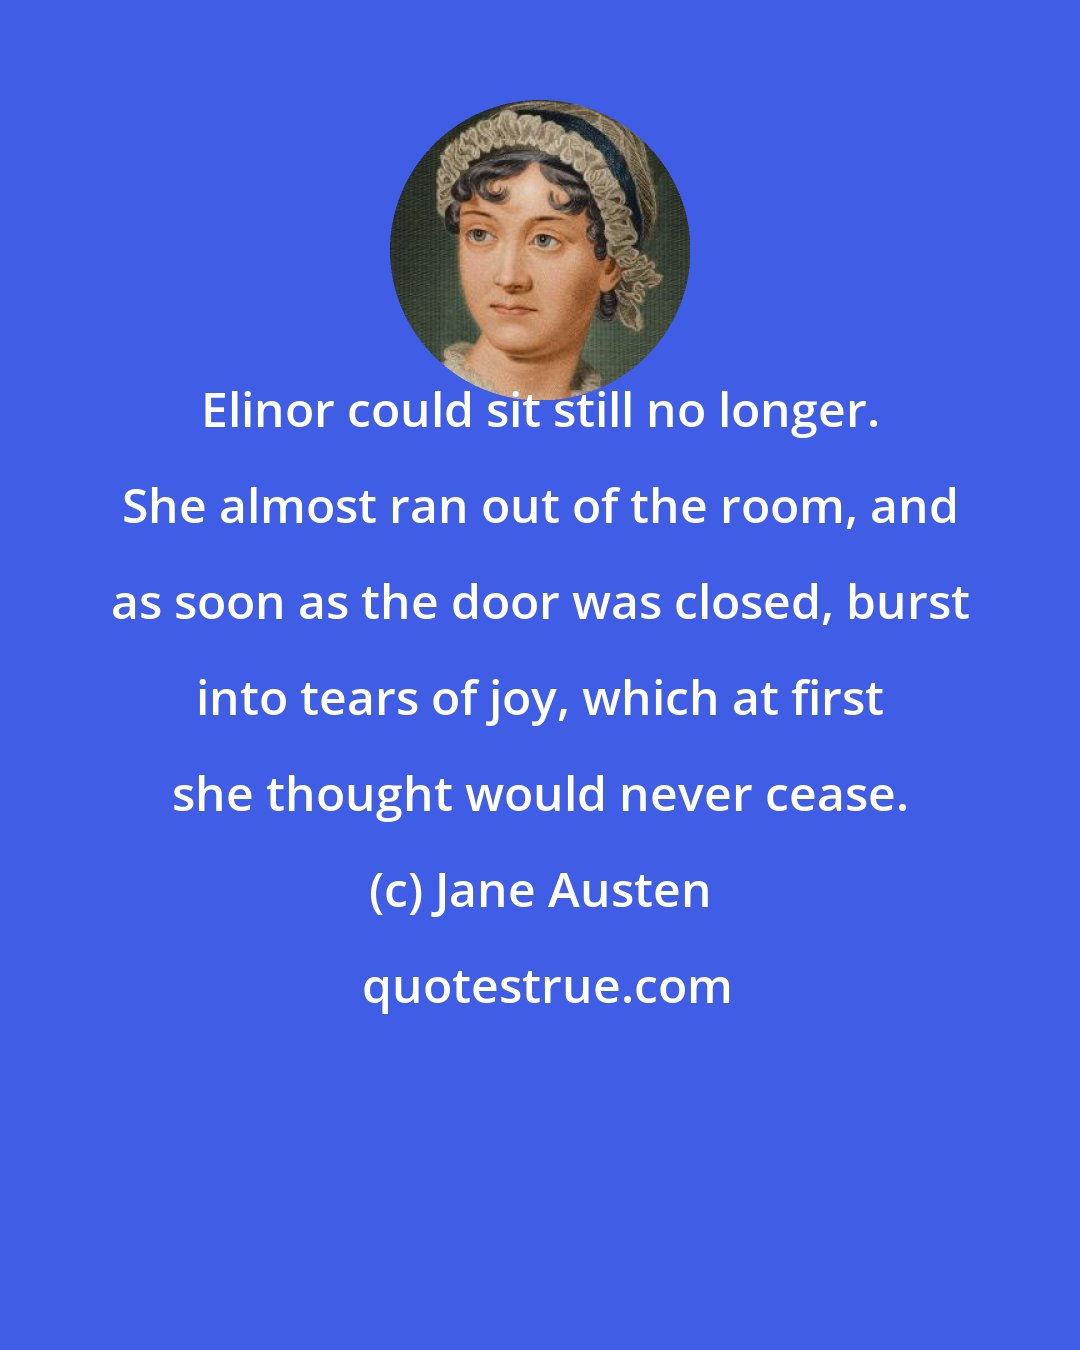 Jane Austen: Elinor could sit still no longer. She almost ran out of the room, and as soon as the door was closed, burst into tears of joy, which at first she thought would never cease.